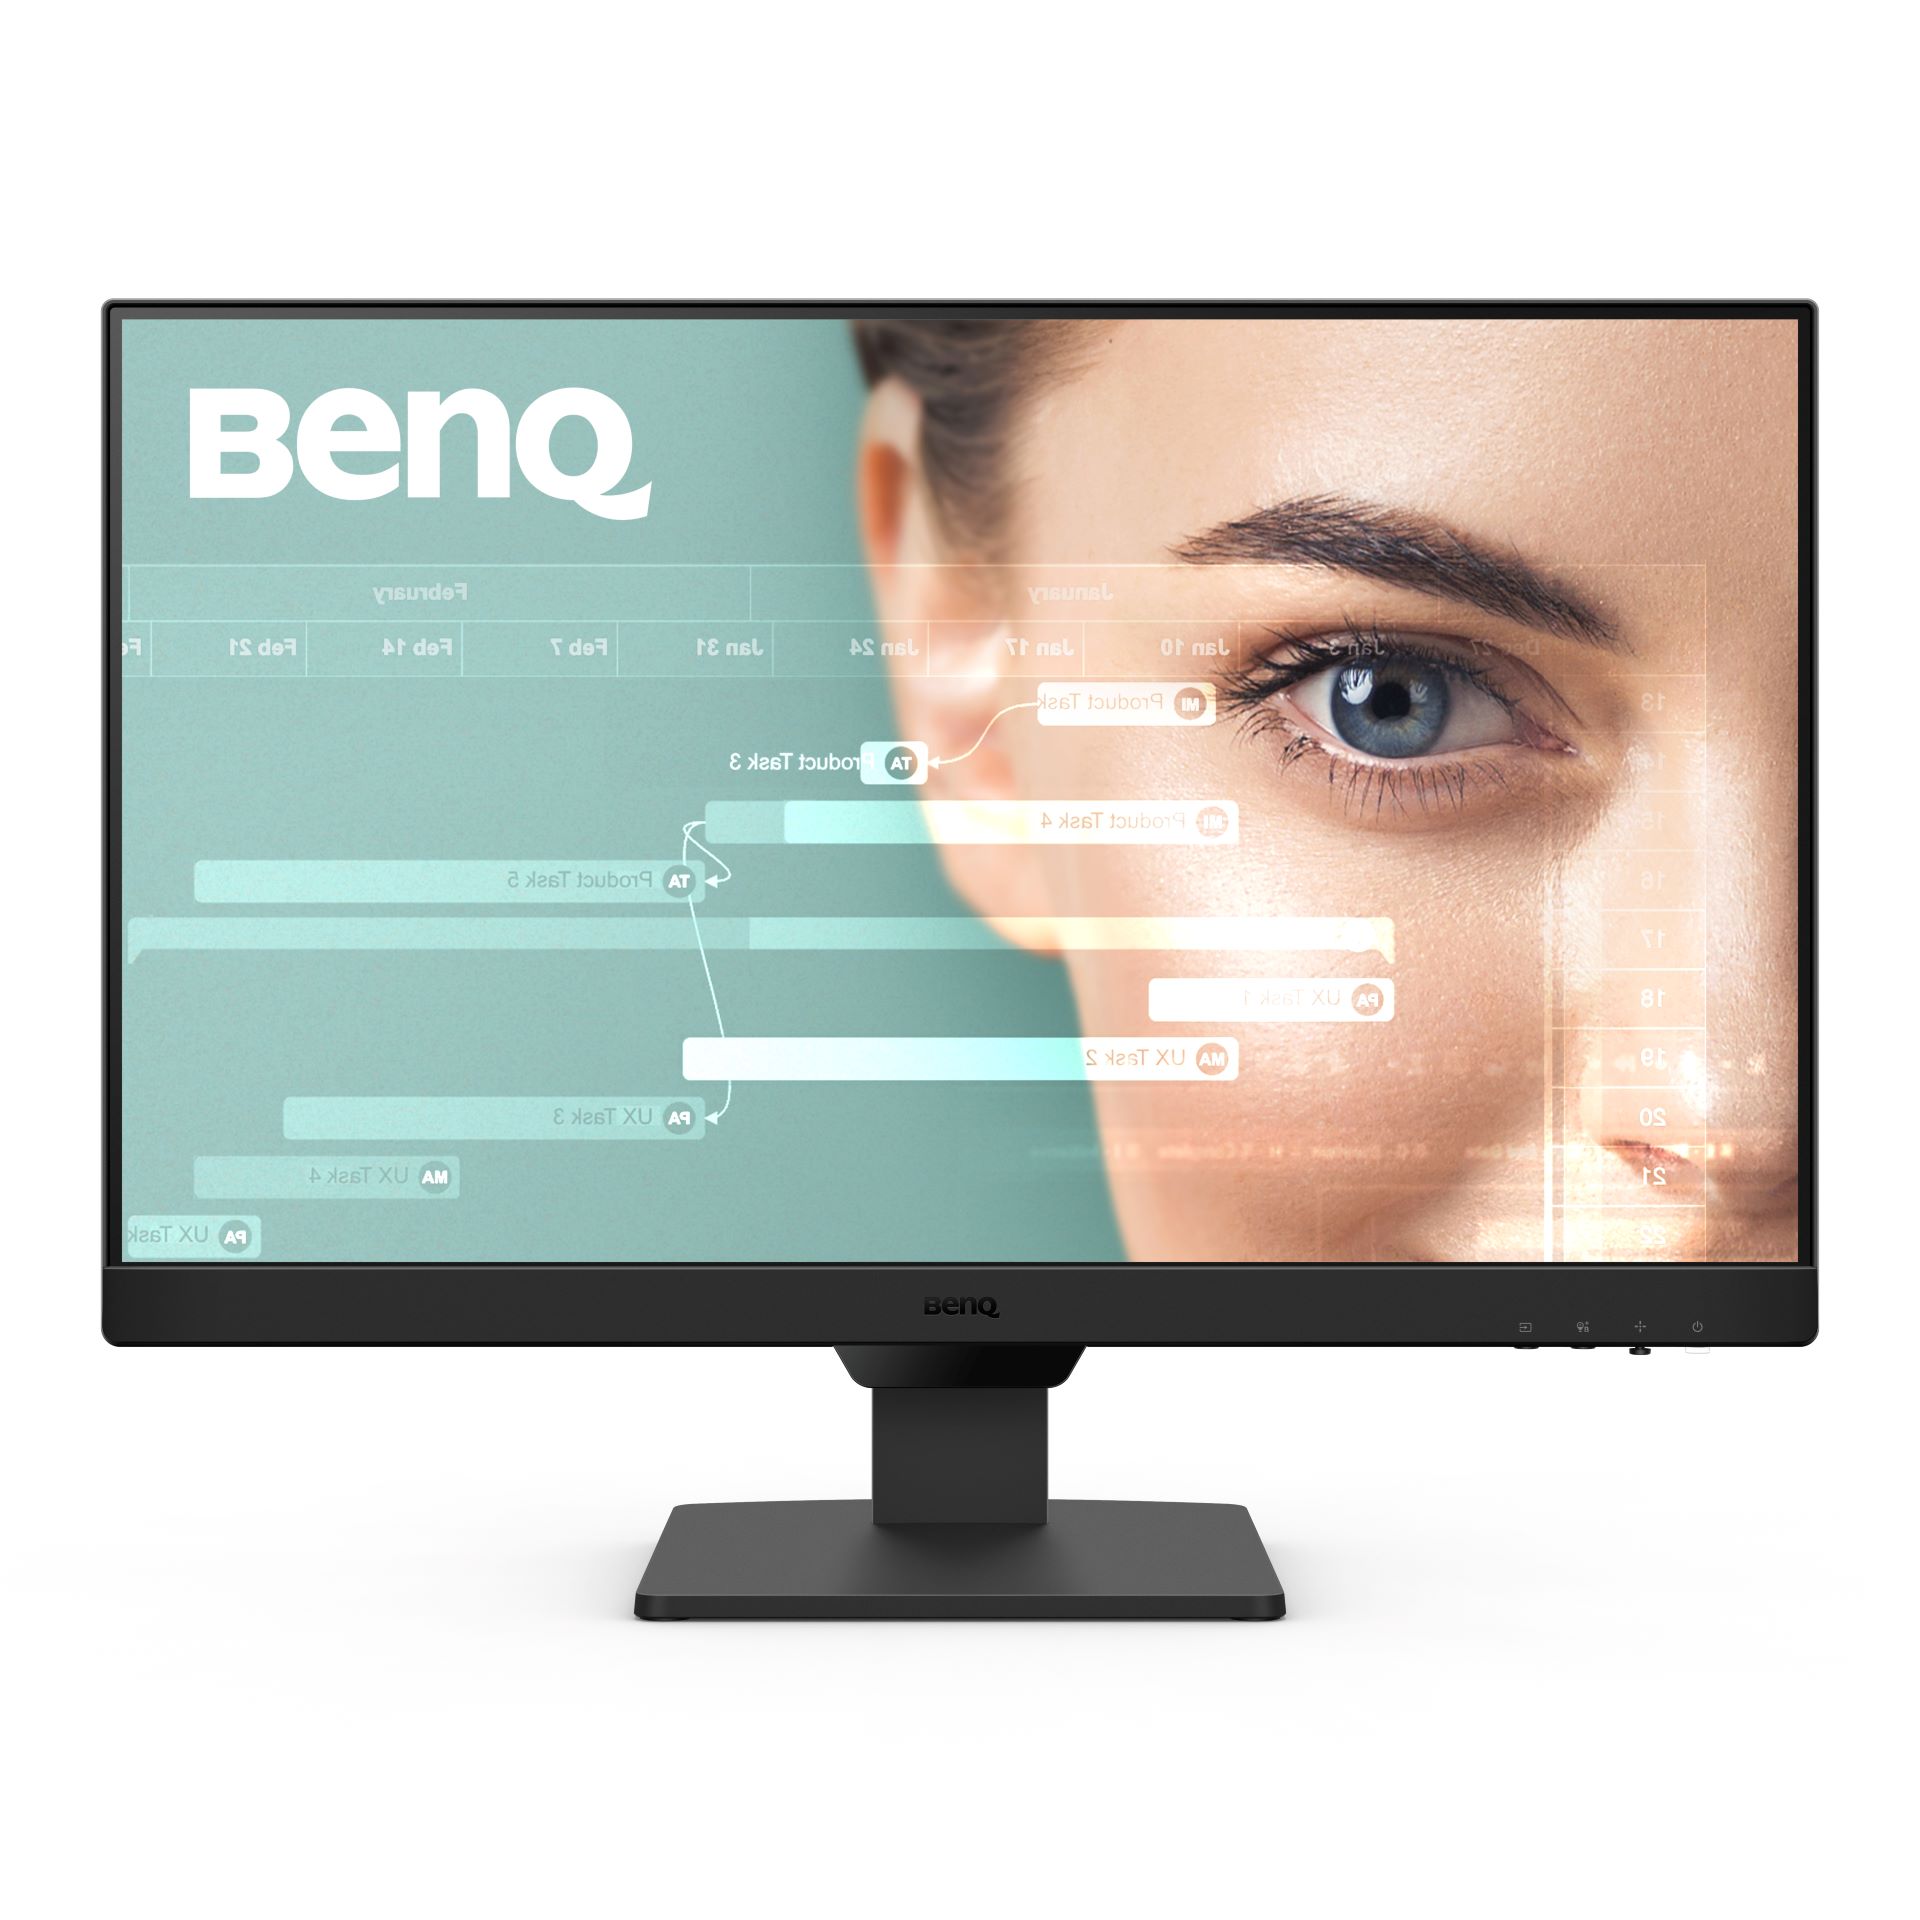 BenQ Launches New 100Hz Monitors with Advanced Features